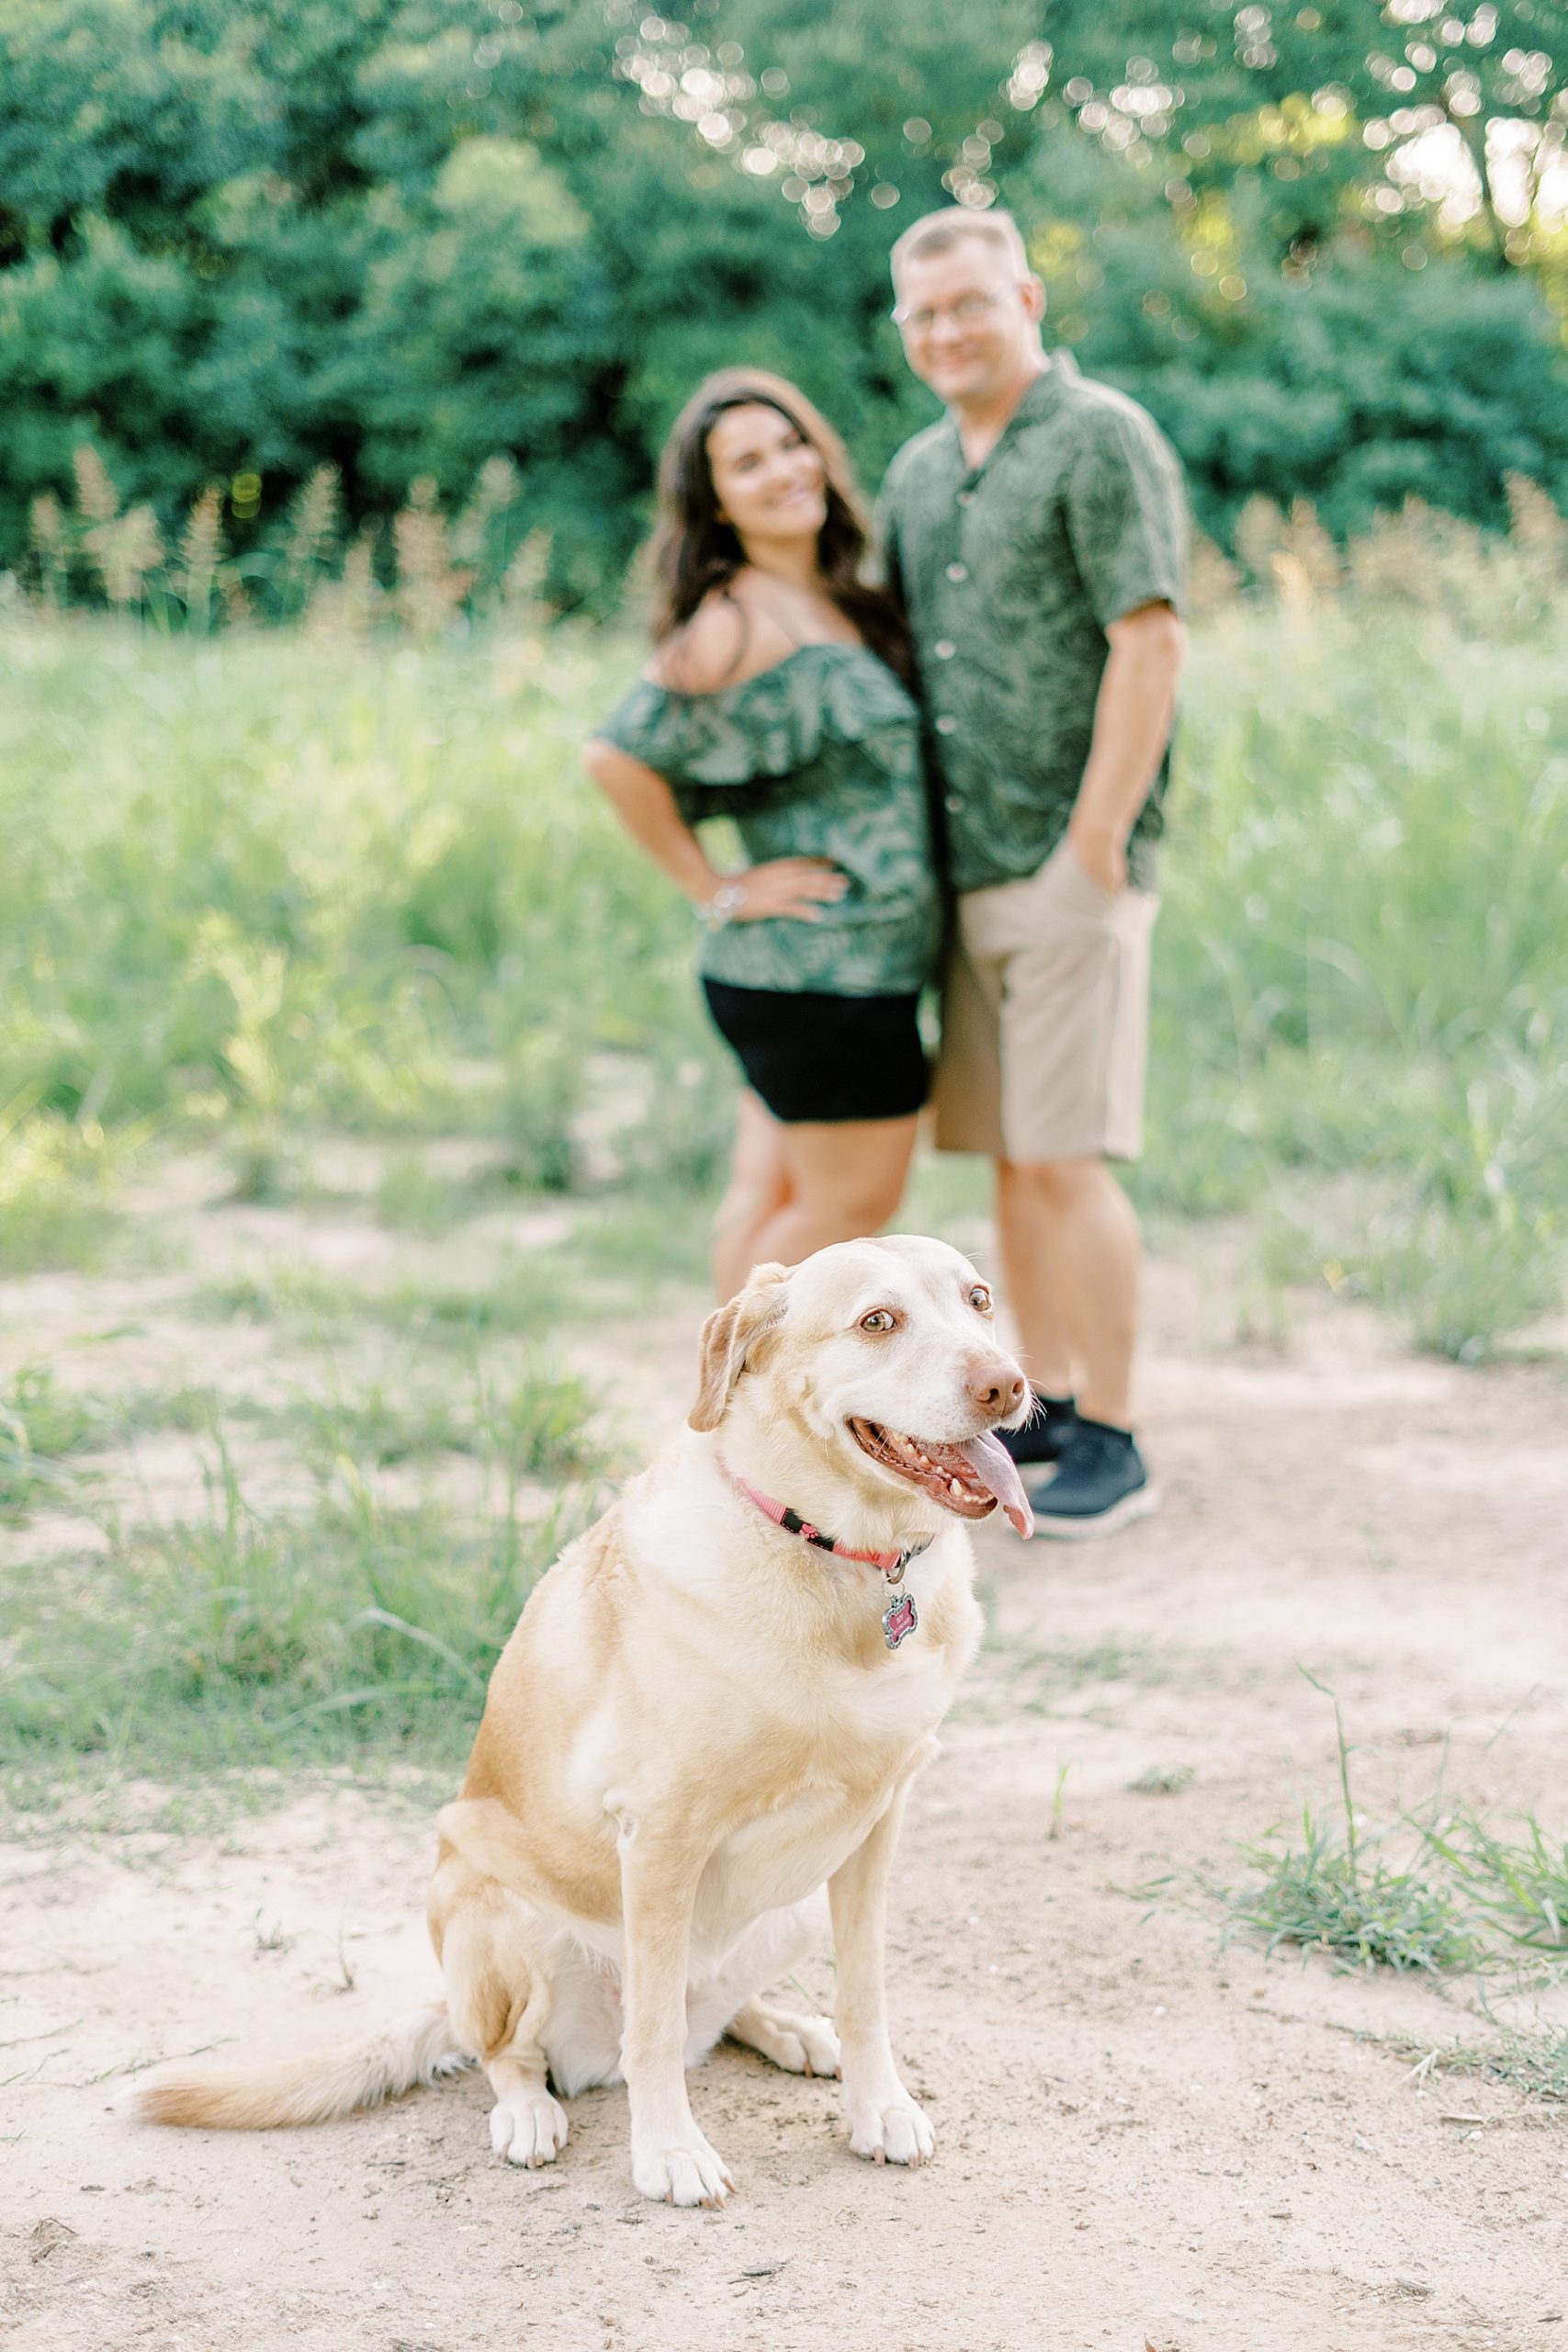 Dog looking at camera while couple embraces in background